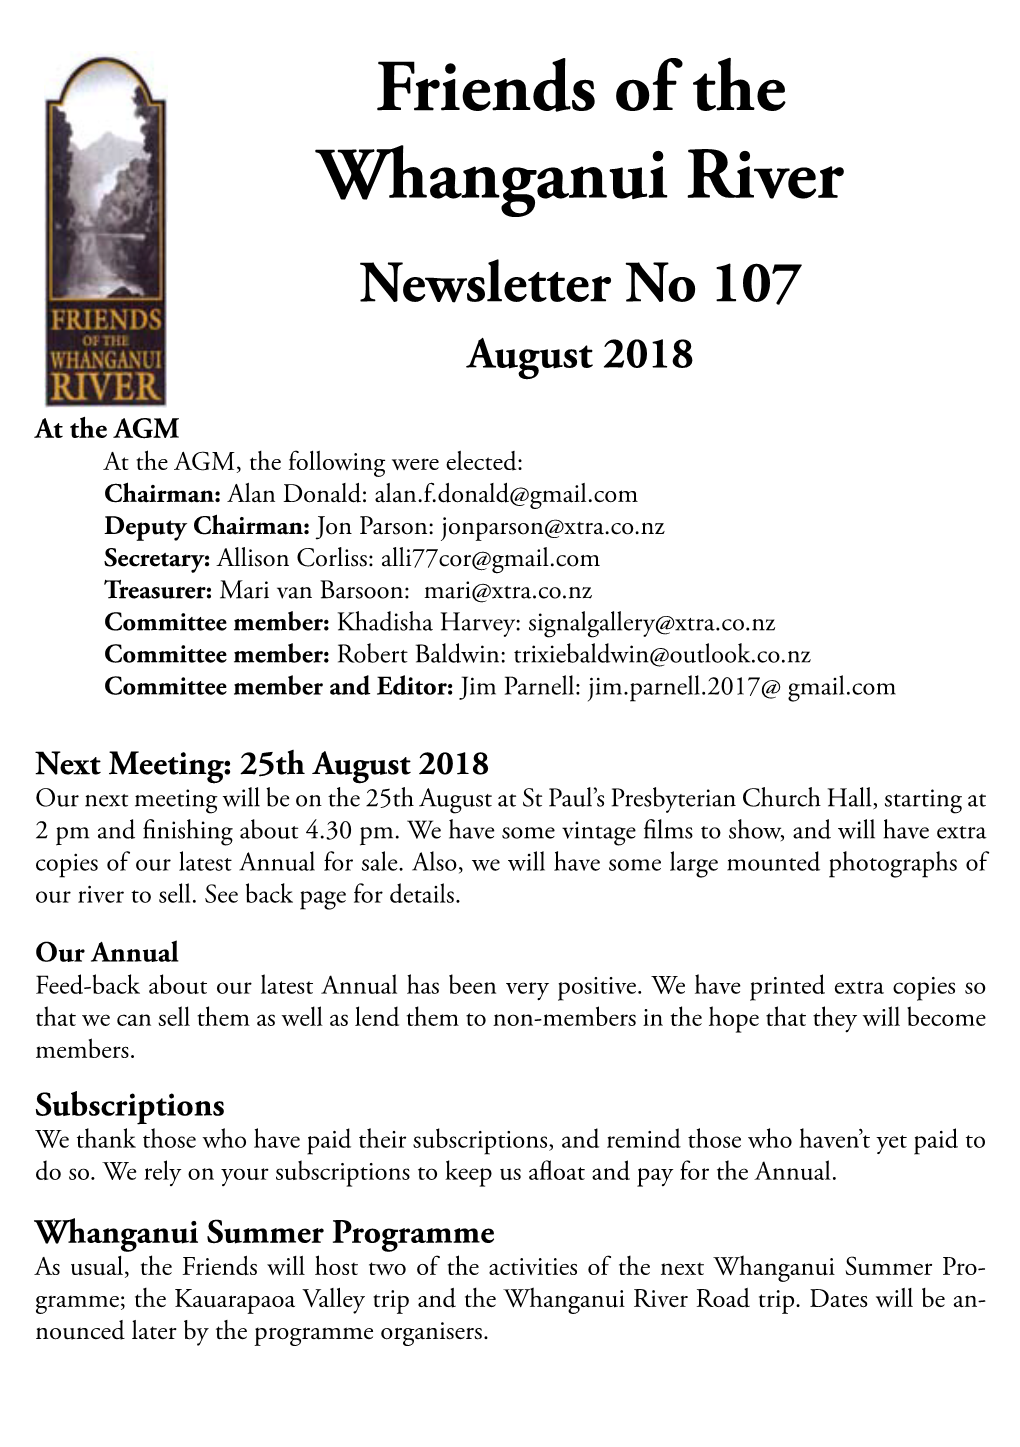 Friends of the Whanganui River Newsletter No 107 August 2018